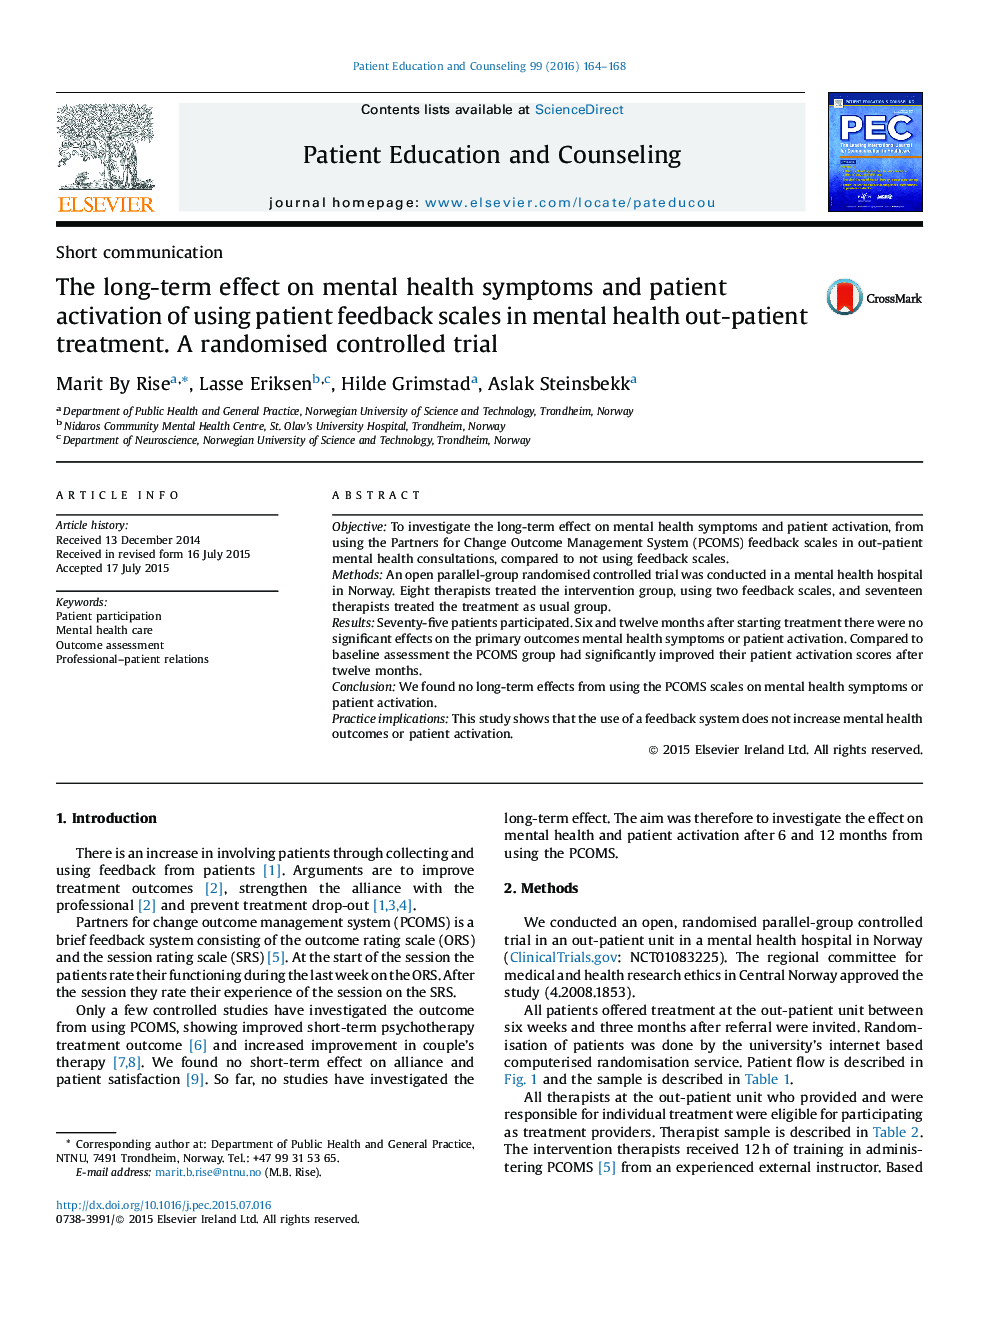 The long-term effect on mental health symptoms and patient activation of using patient feedback scales in mental health out-patient treatment. A randomised controlled trial